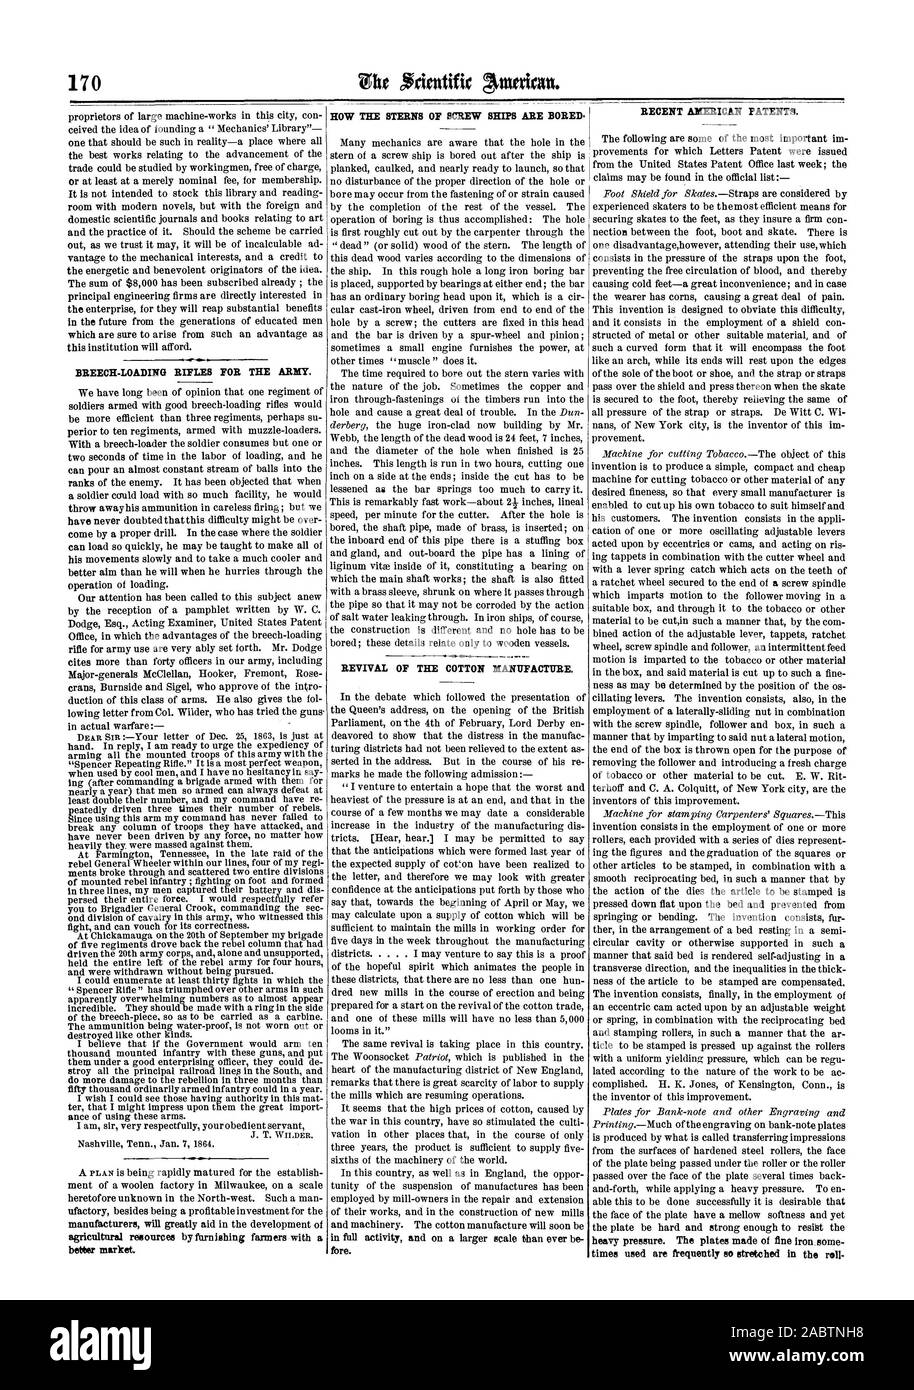 BREECH-LOADING RULES FOR THE ARMY. agricultural resources by furnishing farmers with a bettor market. HOW THE STERNS OF SCREW SHIPS ARE BORED. REVIVAL OF THE COTTON MANUFACTURE. fore. RECENT AMERICAN PATENTS. heavy pressure. The plates made of fine iron some-, scientific american, 64-03-12 Stock Photo